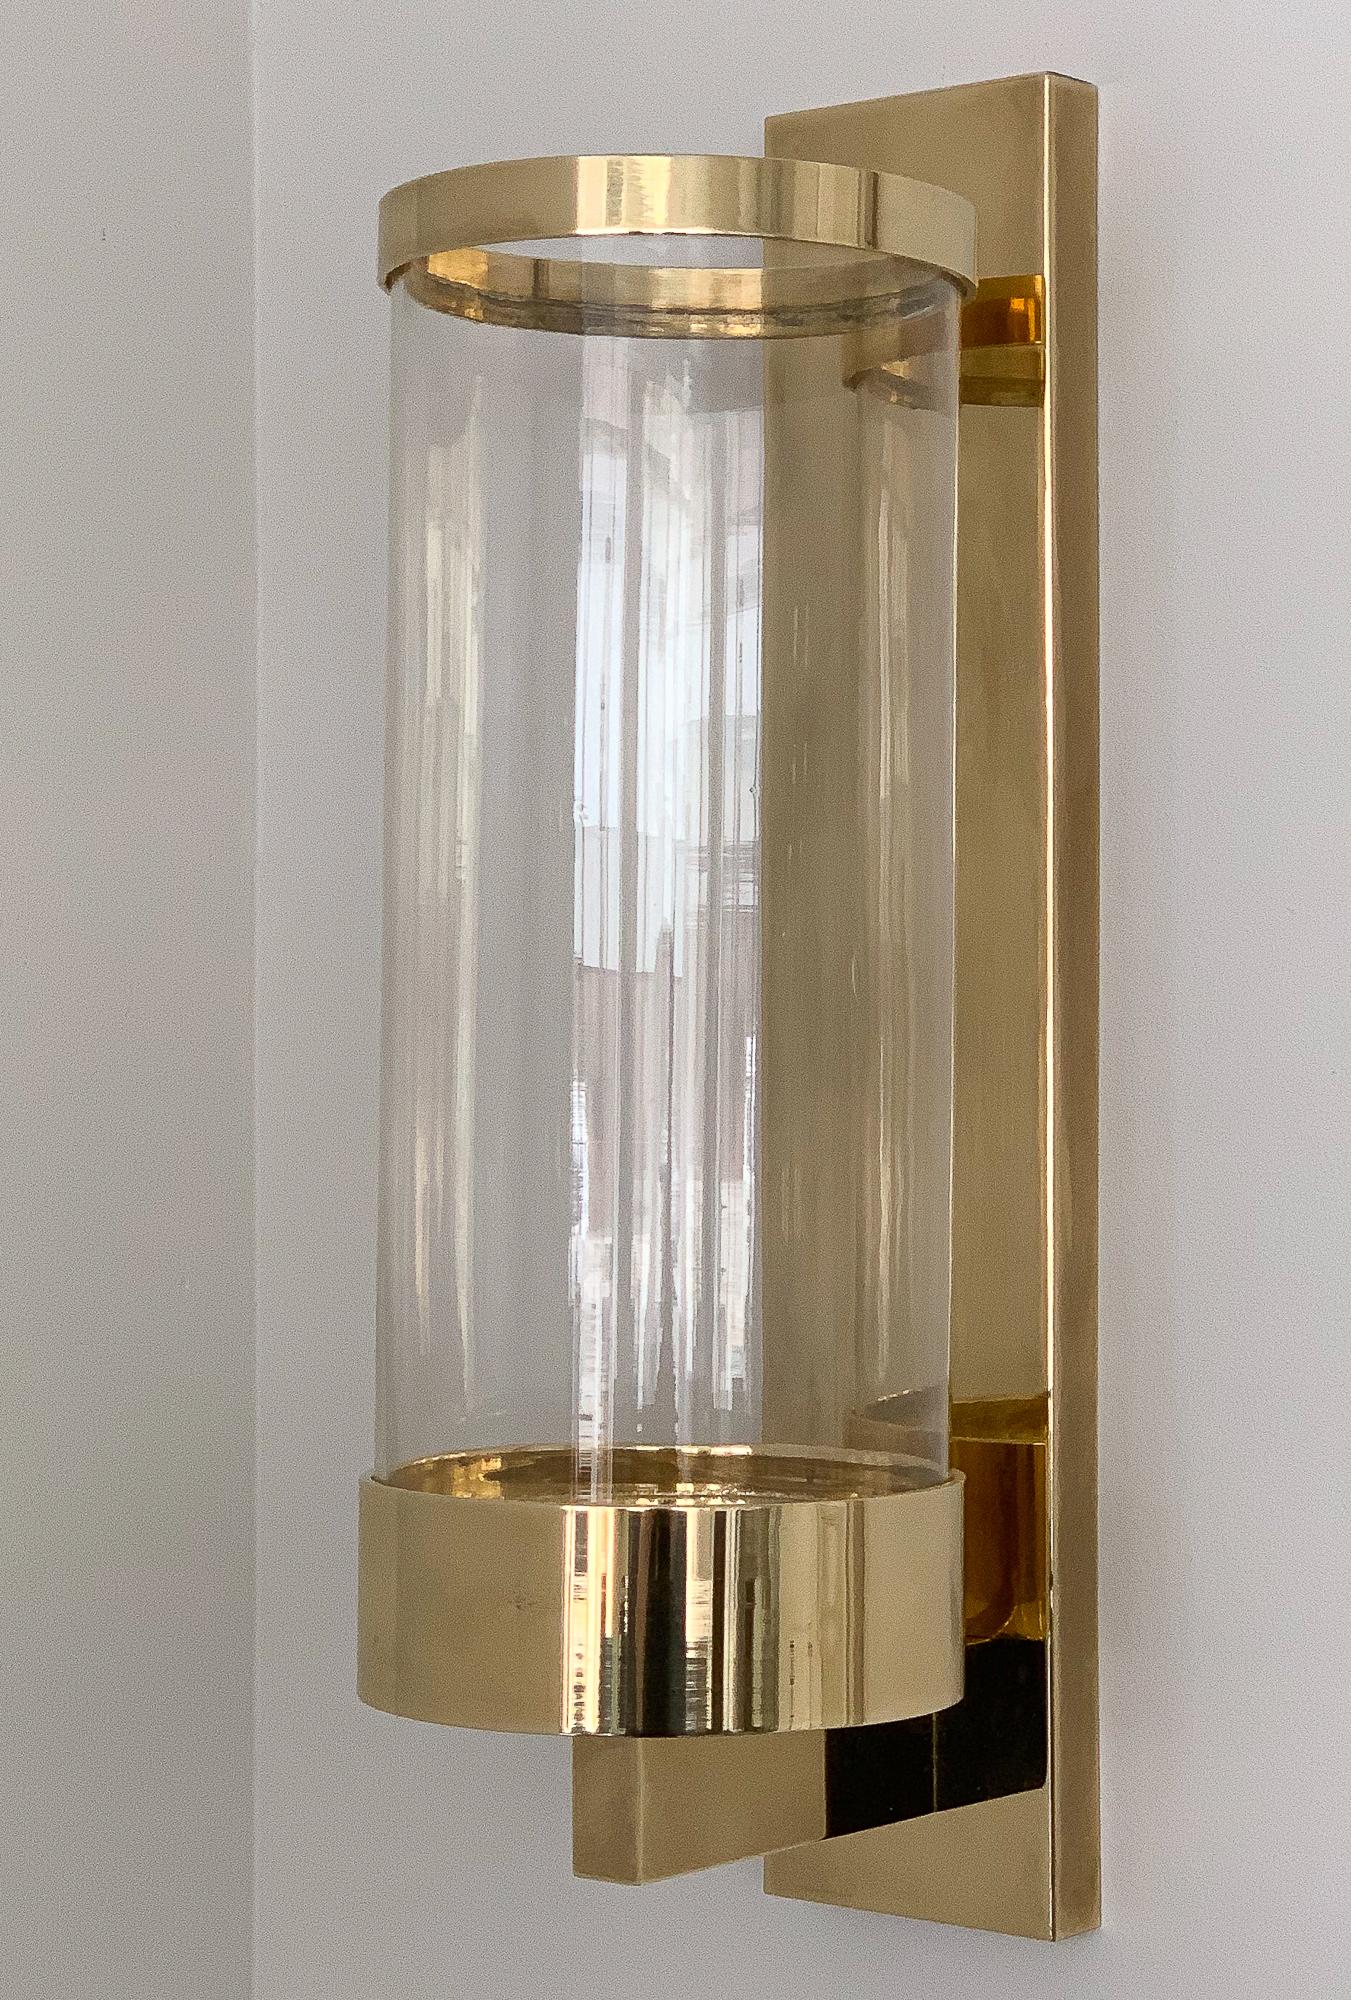 Pair of modern brass and glass candle wall sconces by Chapman Lighting, circa 1978. Polished solid brass and clear hand blown glass hurricane shades with brass rimmed tops. Graduated base to fit a variety of candle sizes. Original label on each